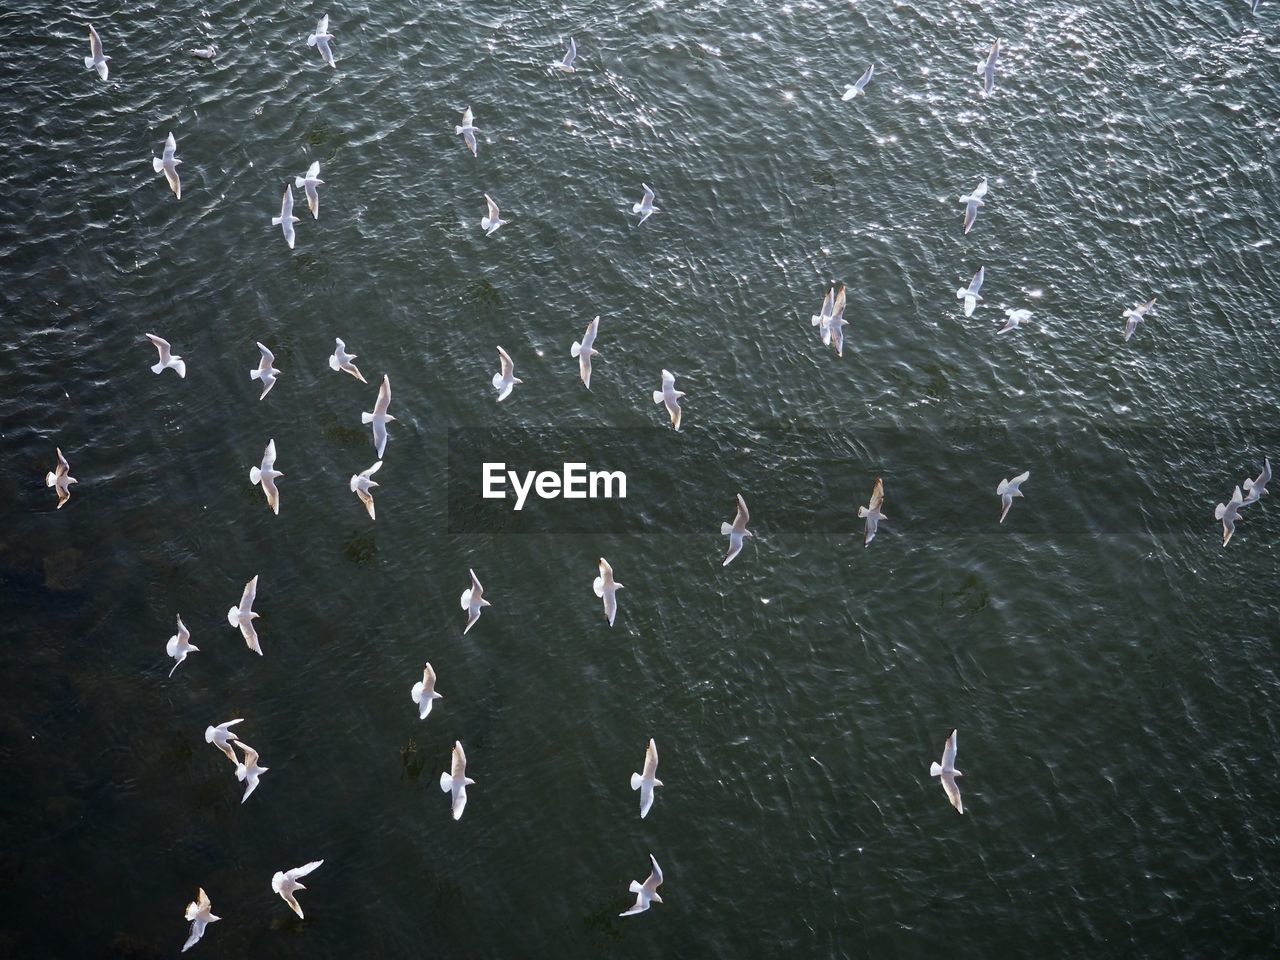 HIGH ANGLE VIEW OF BIRDS FLYING IN WATER